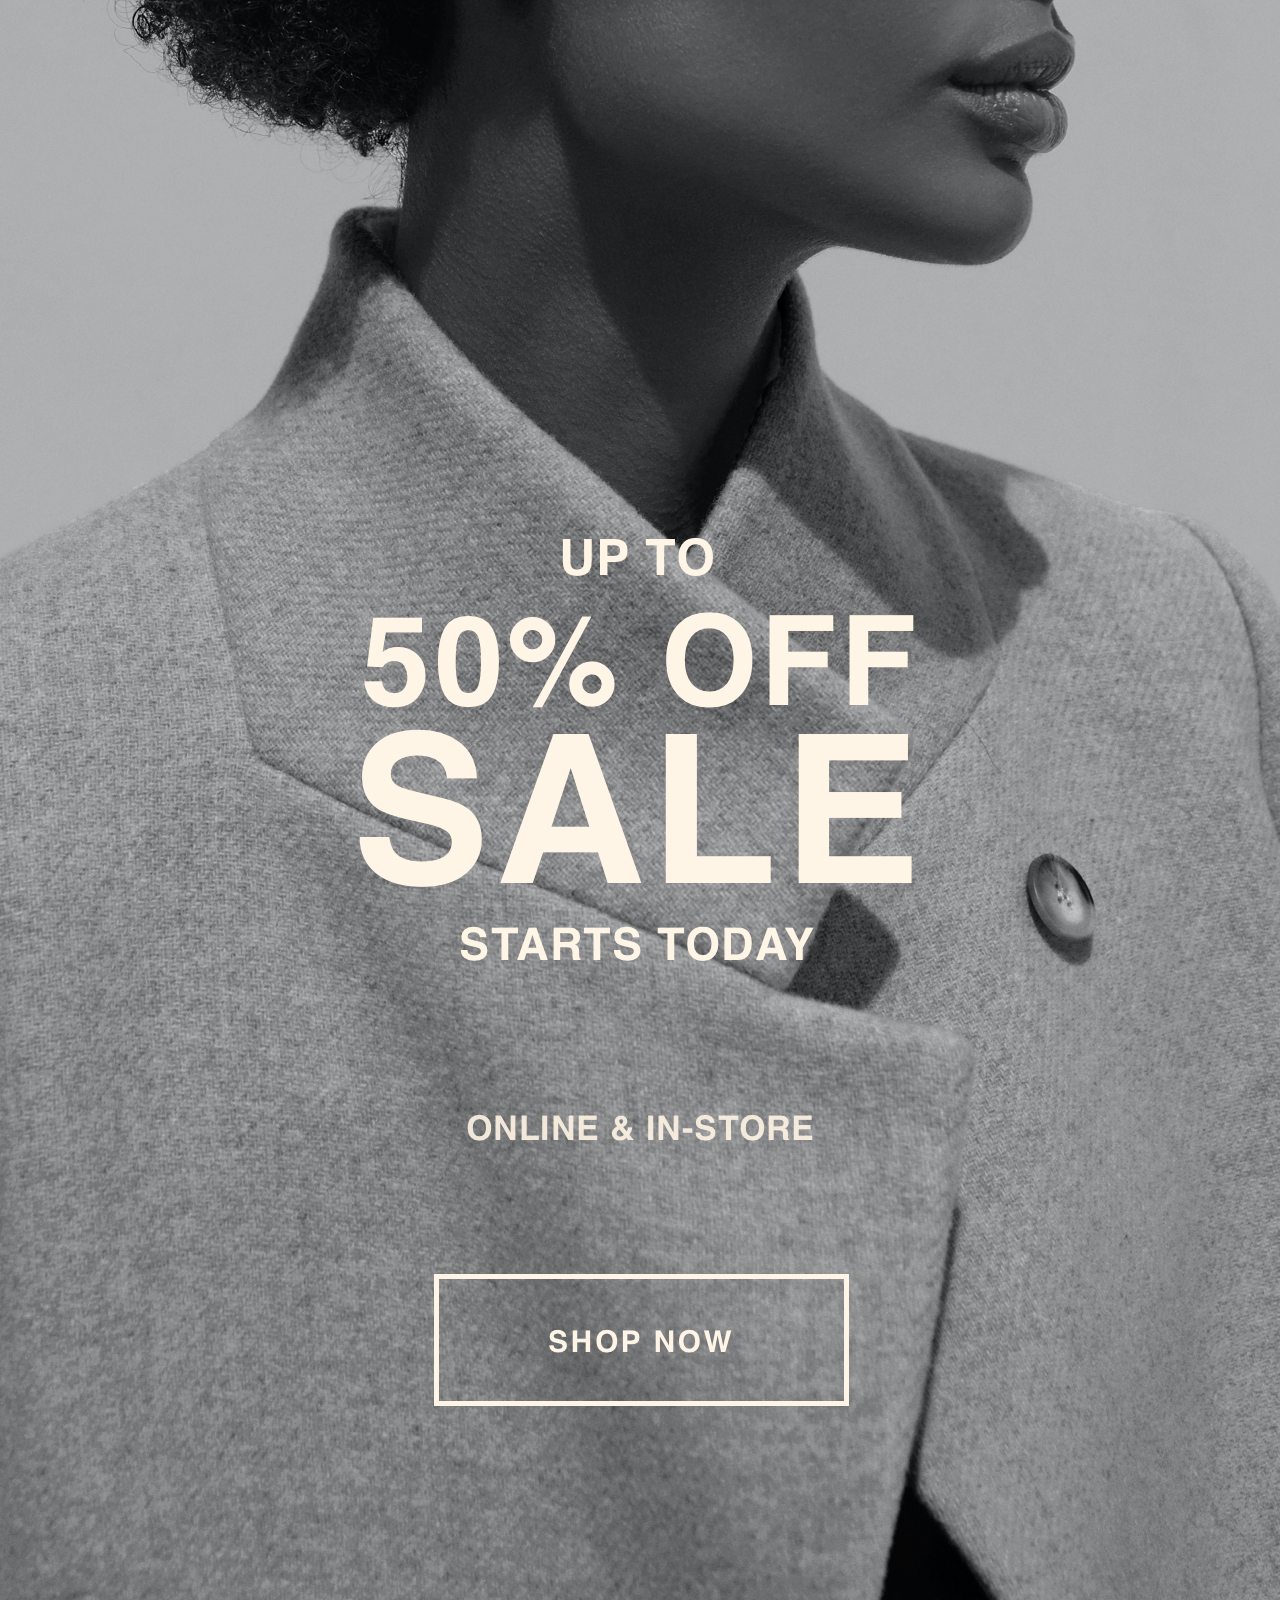 Now On: The Reiss Sale - REISS Email ...